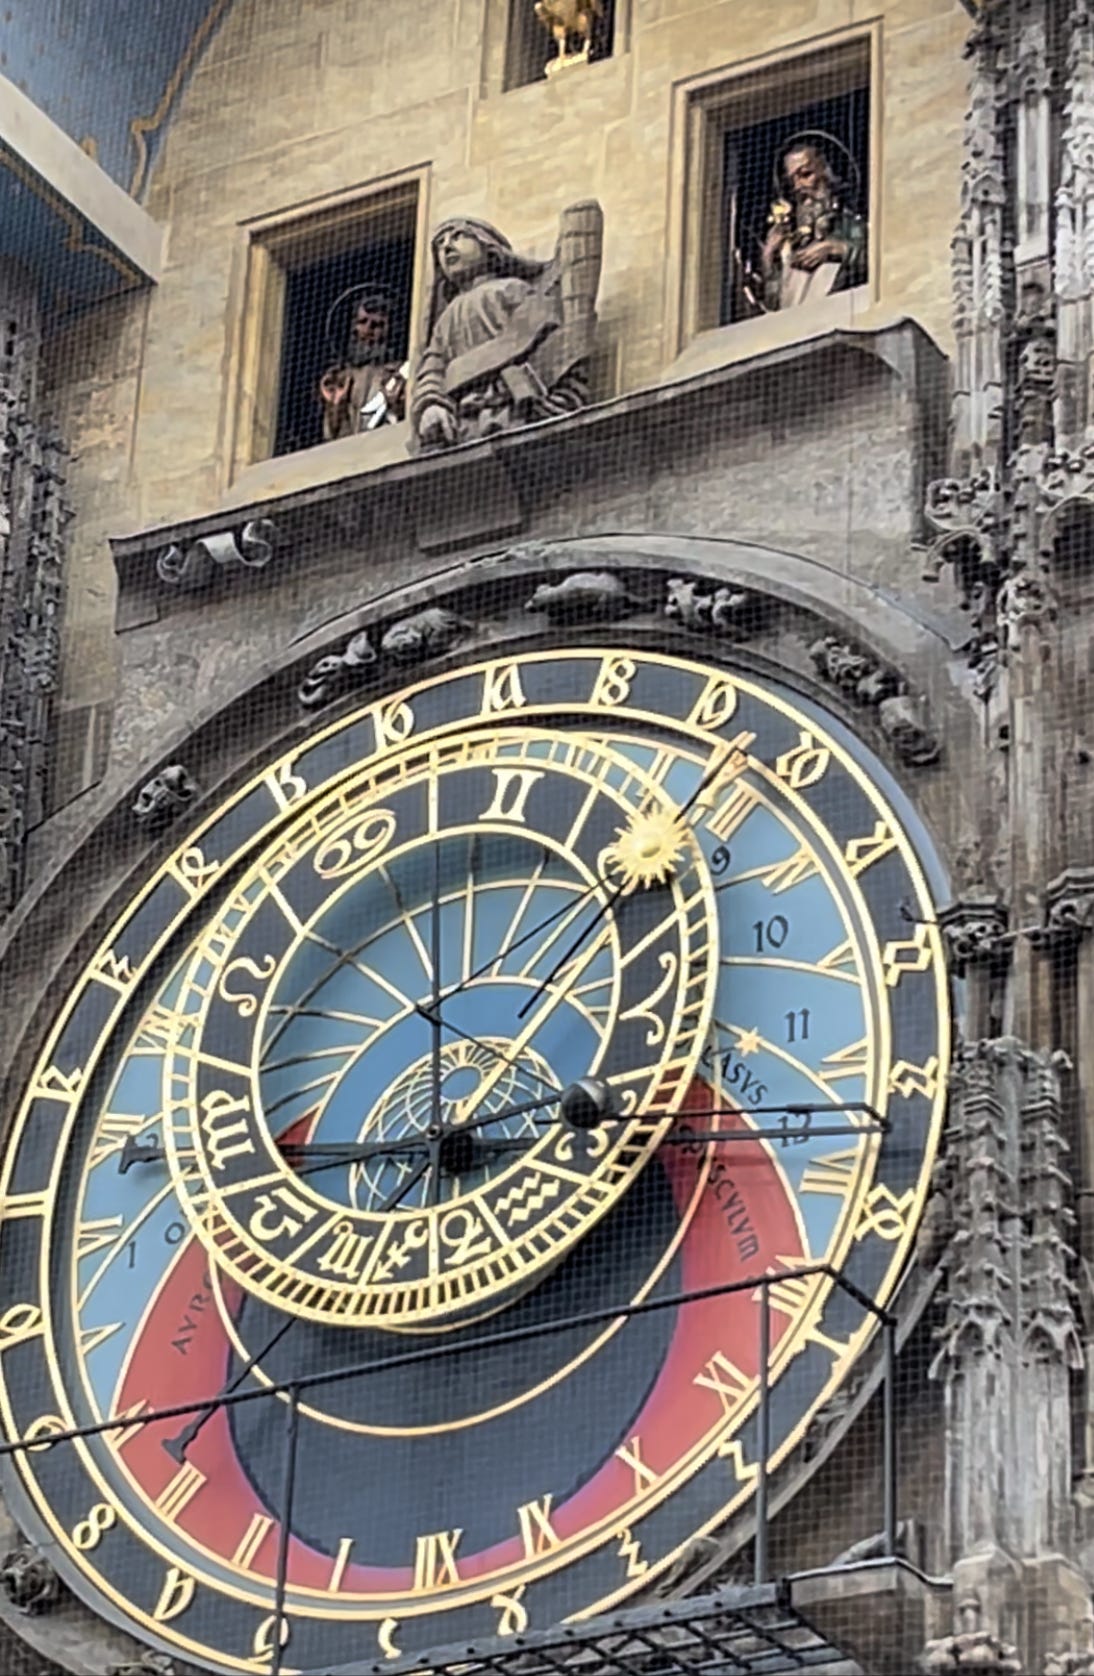 A clock of colorful dials calibrating the position of the sun and moon with astronomical details and above is windows with statues of various Catholic saints.